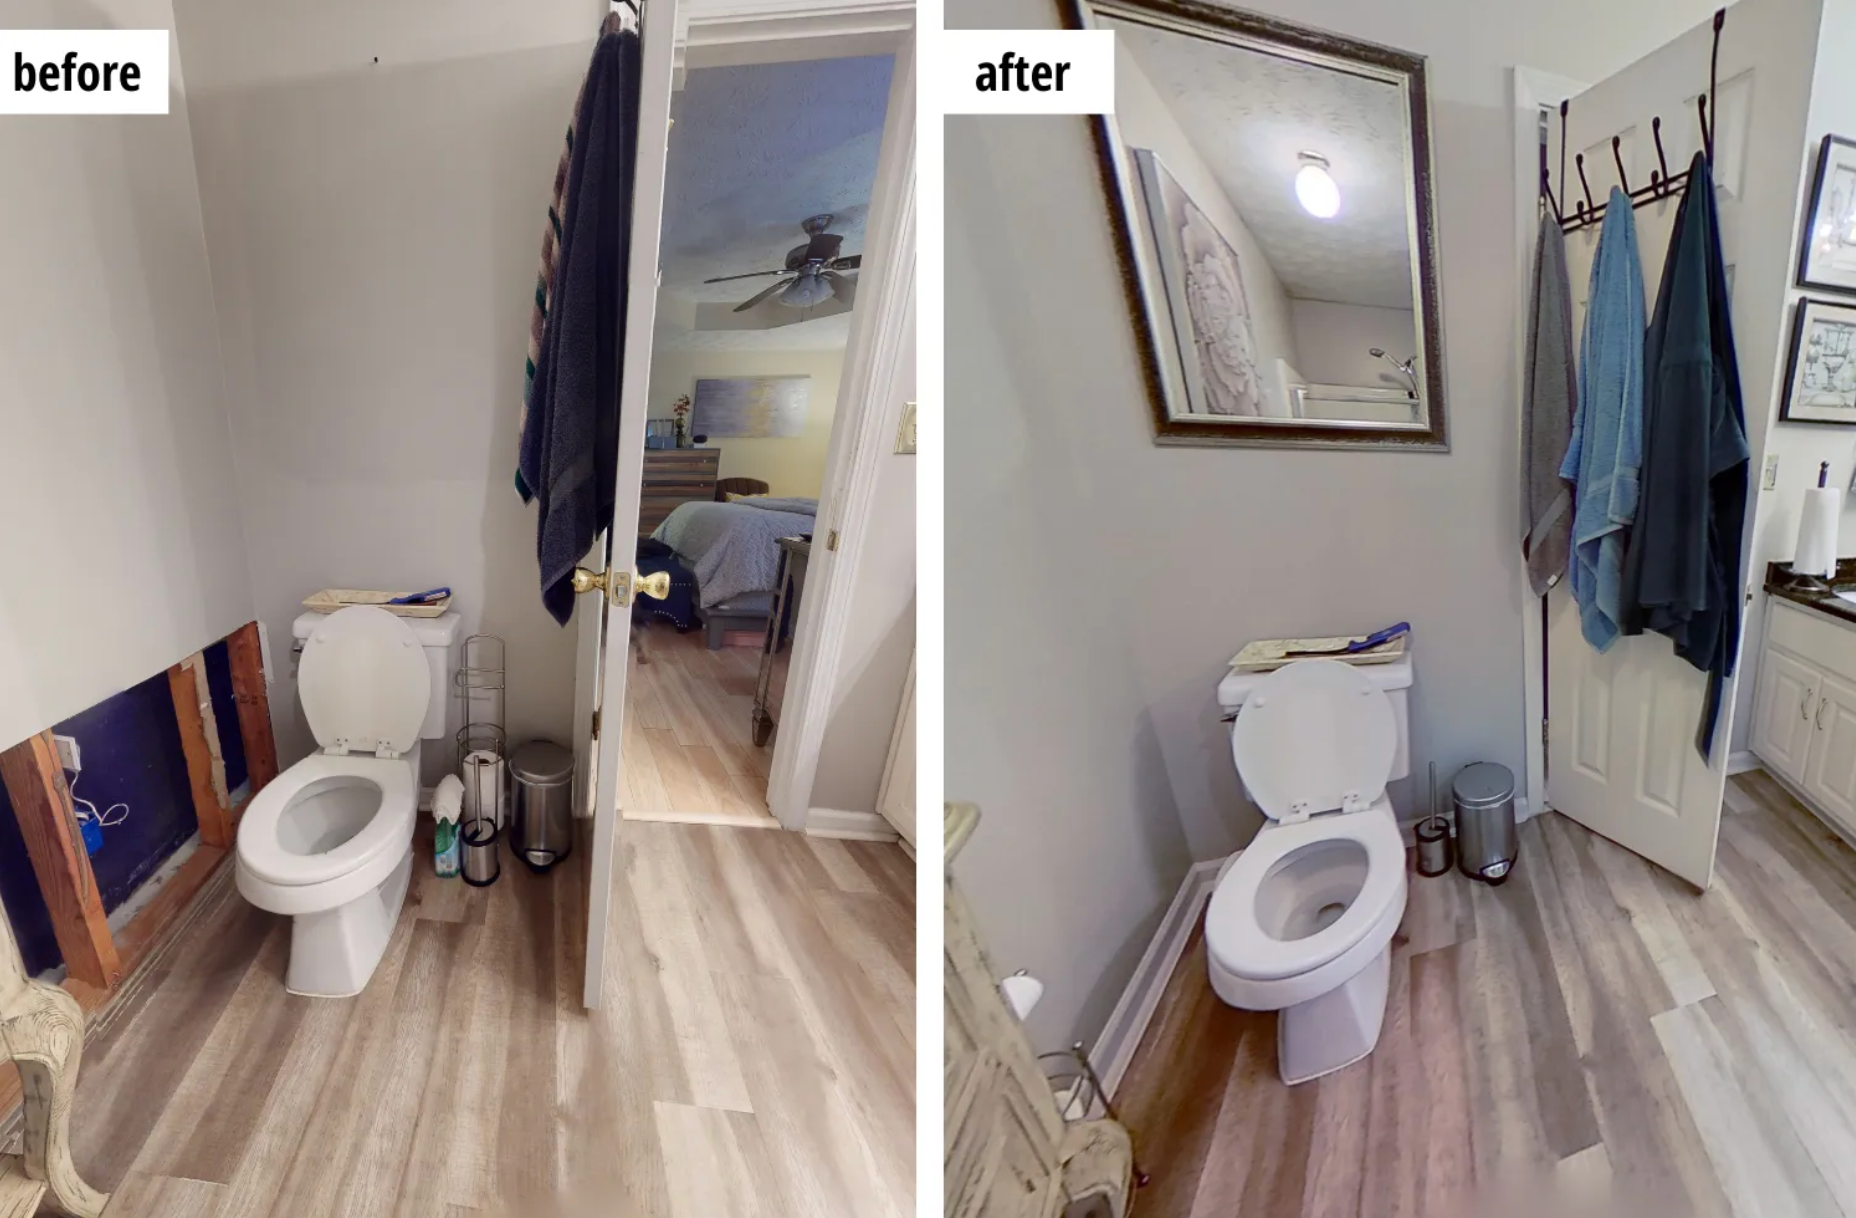 before after picture of bathroom that was restored after a flood